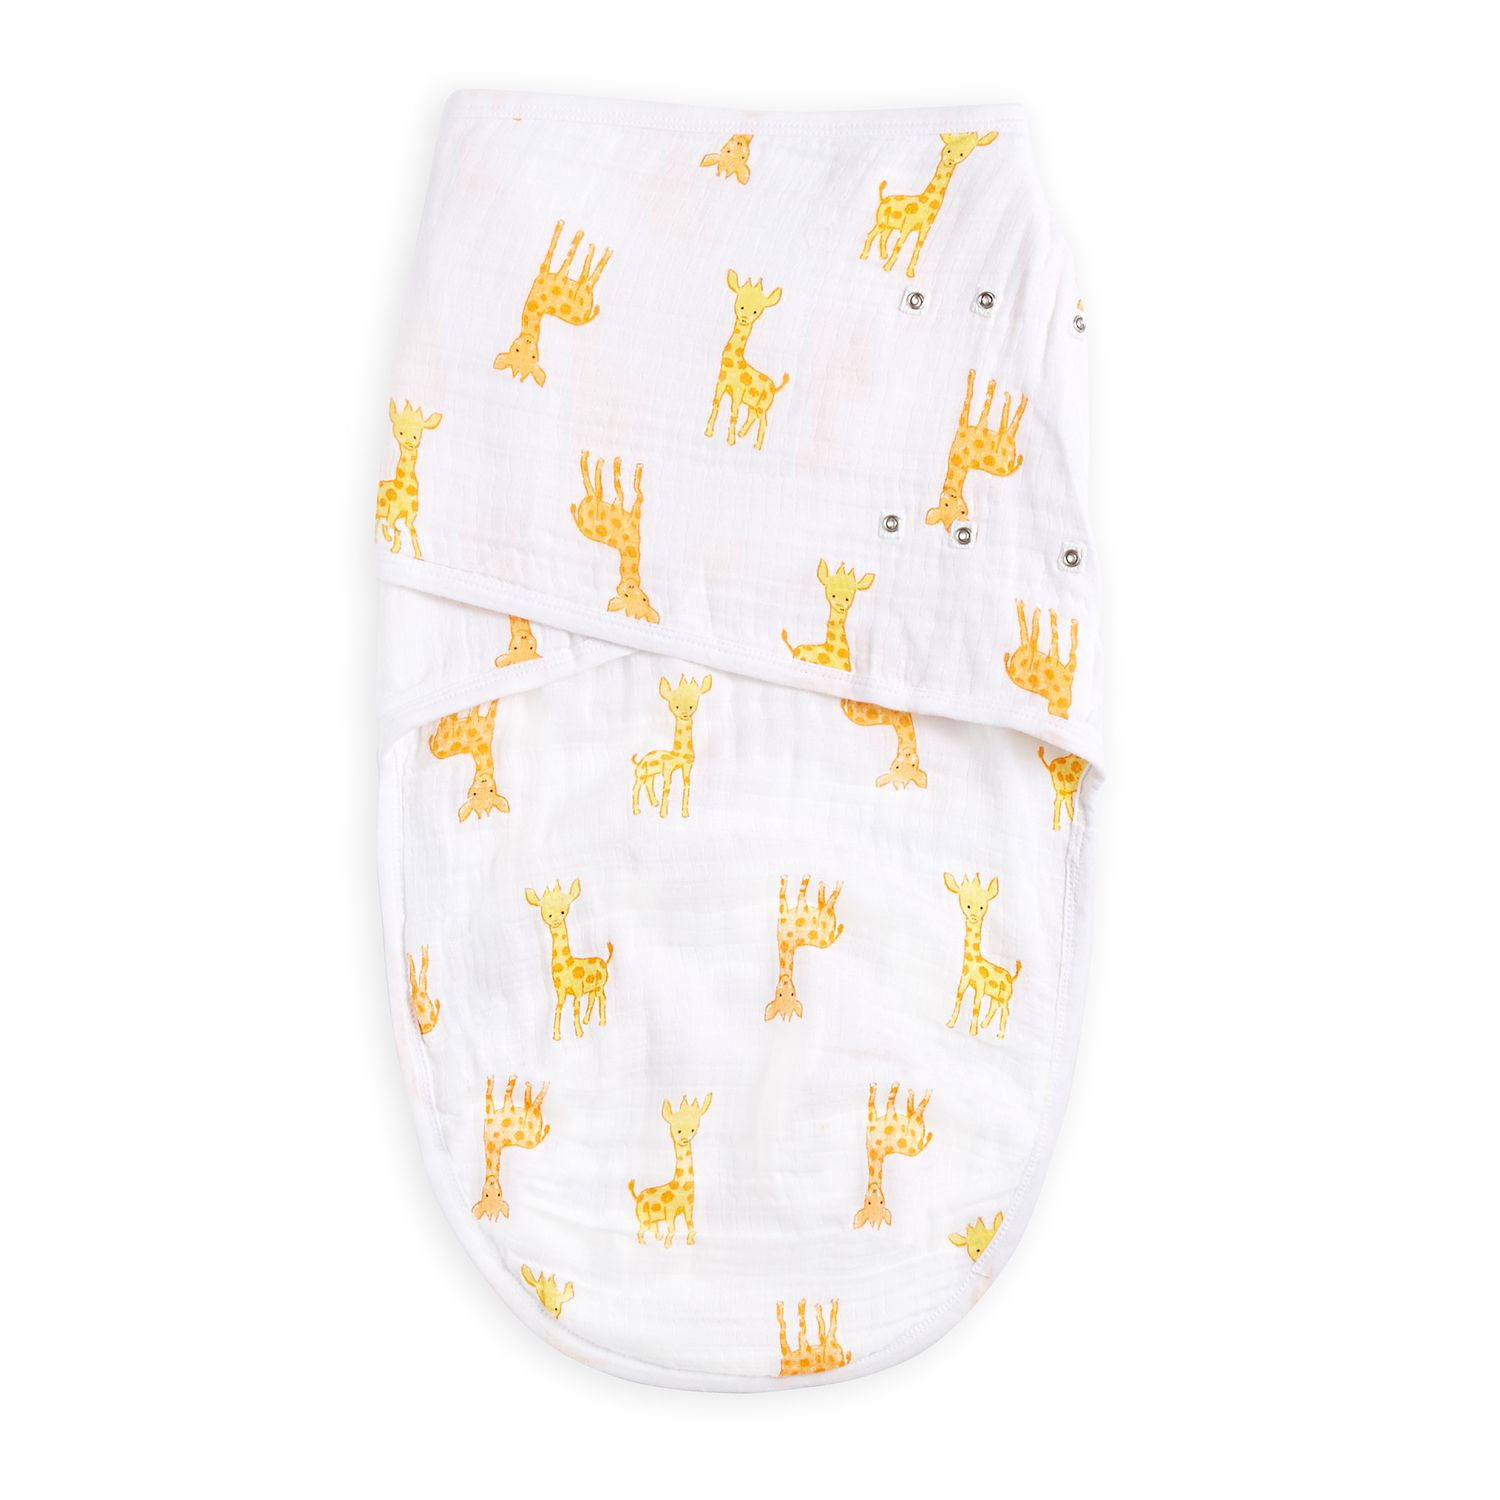 aden by aden and anais wrap swaddle